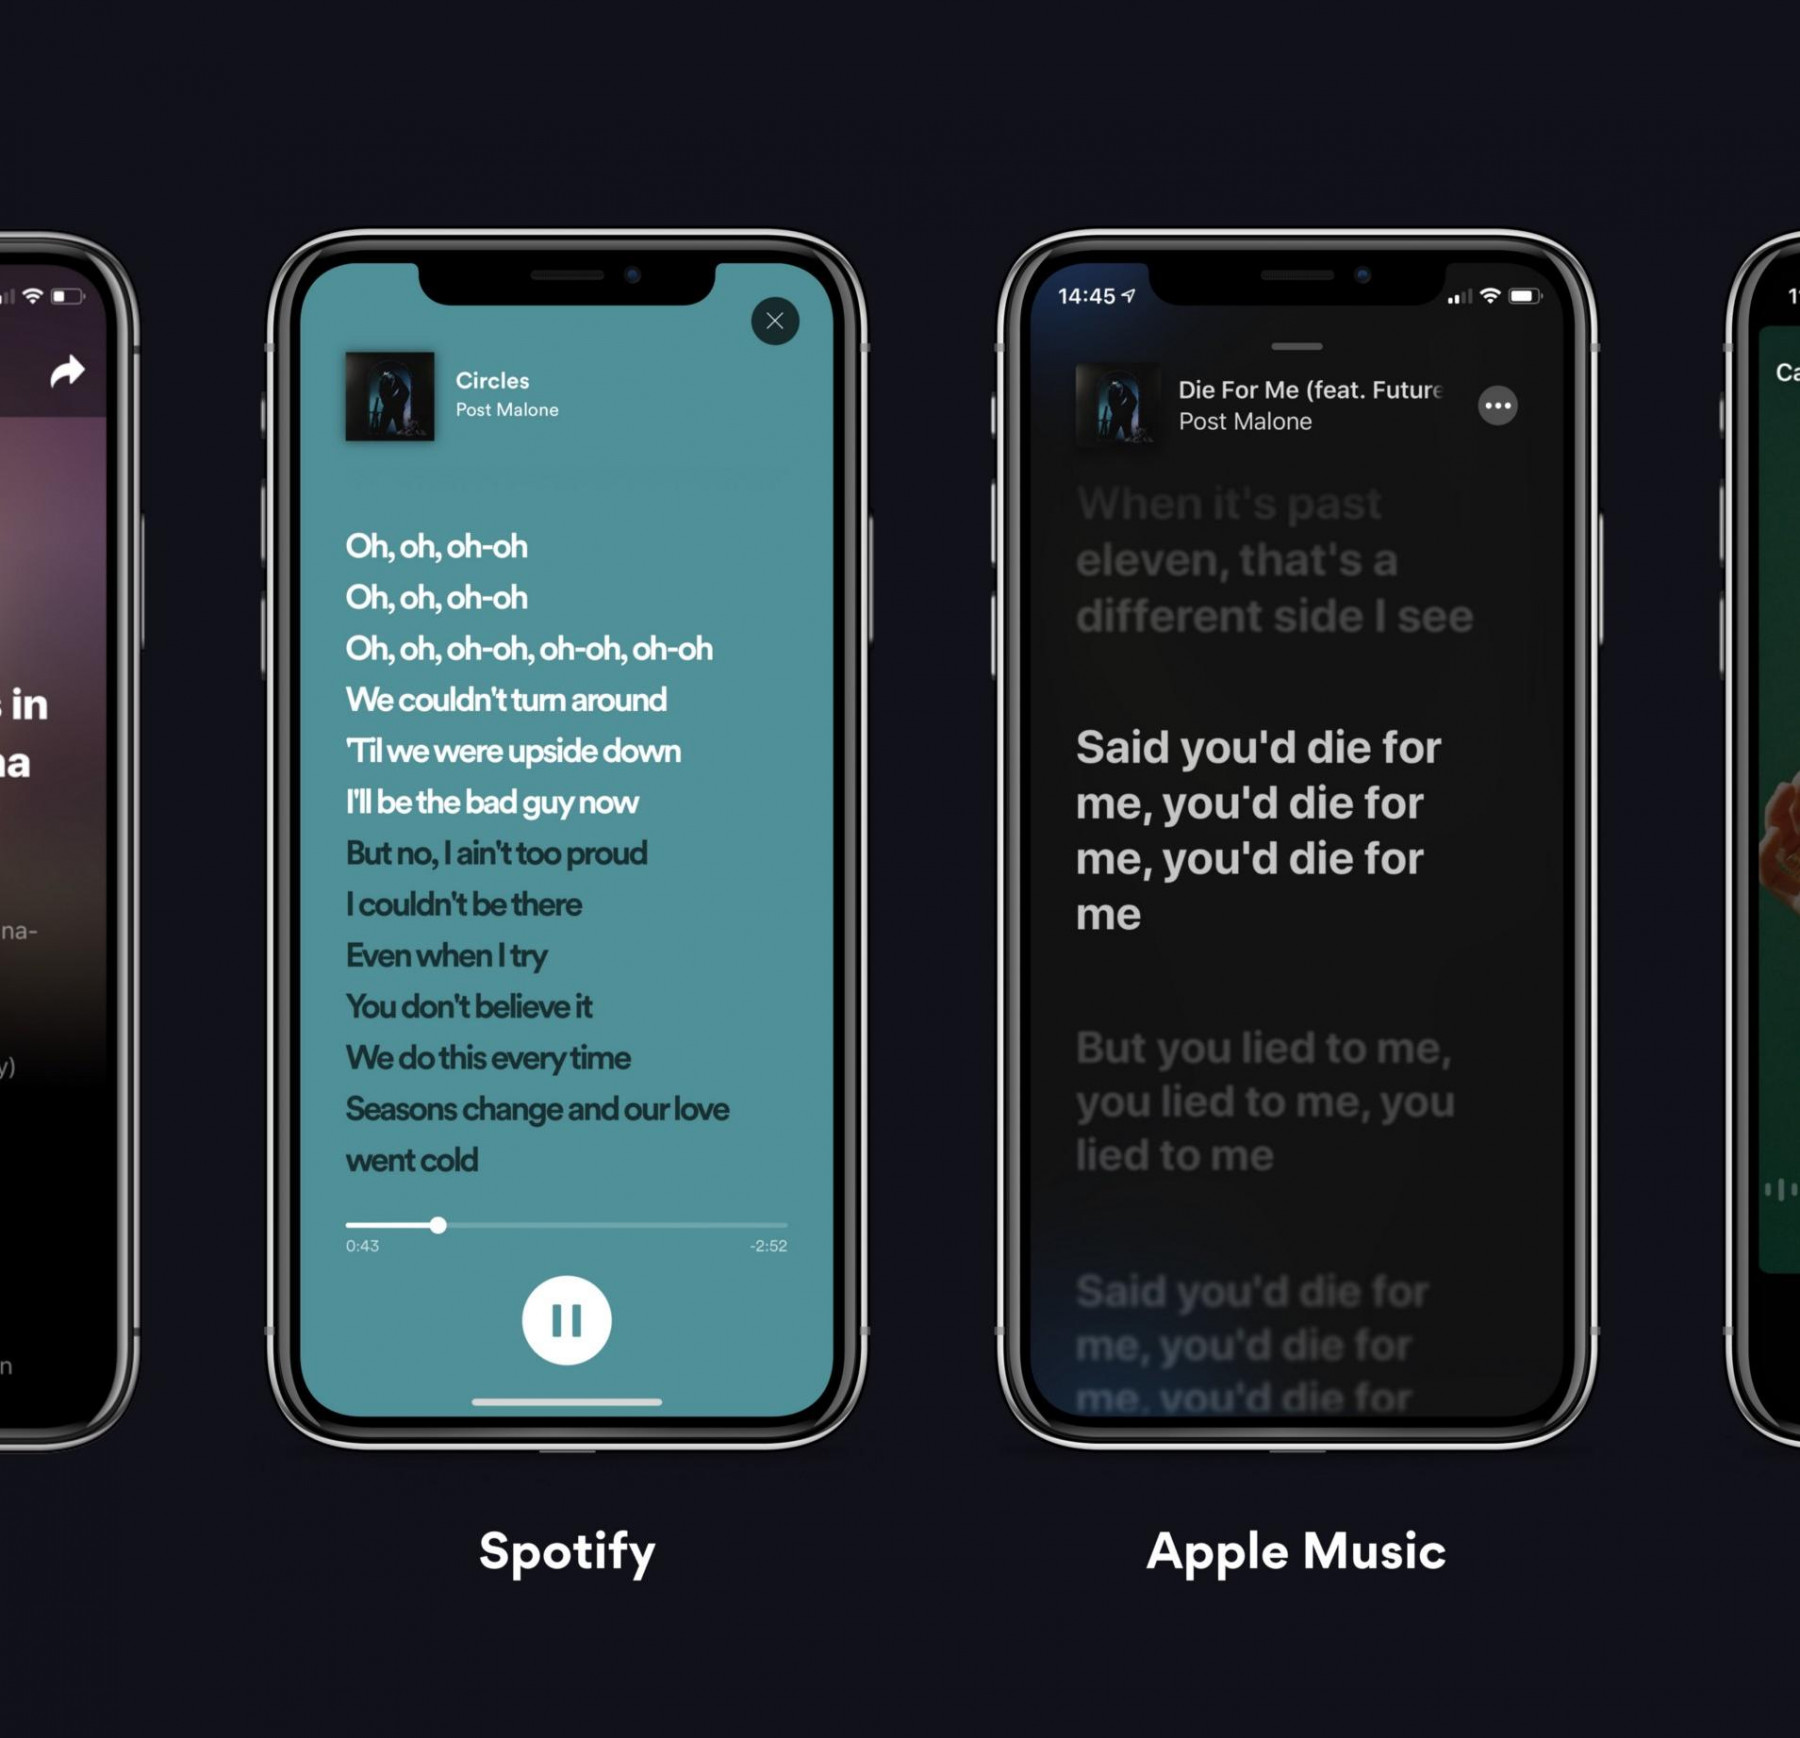 How to view live lyrics in music app on iPhone and iPad